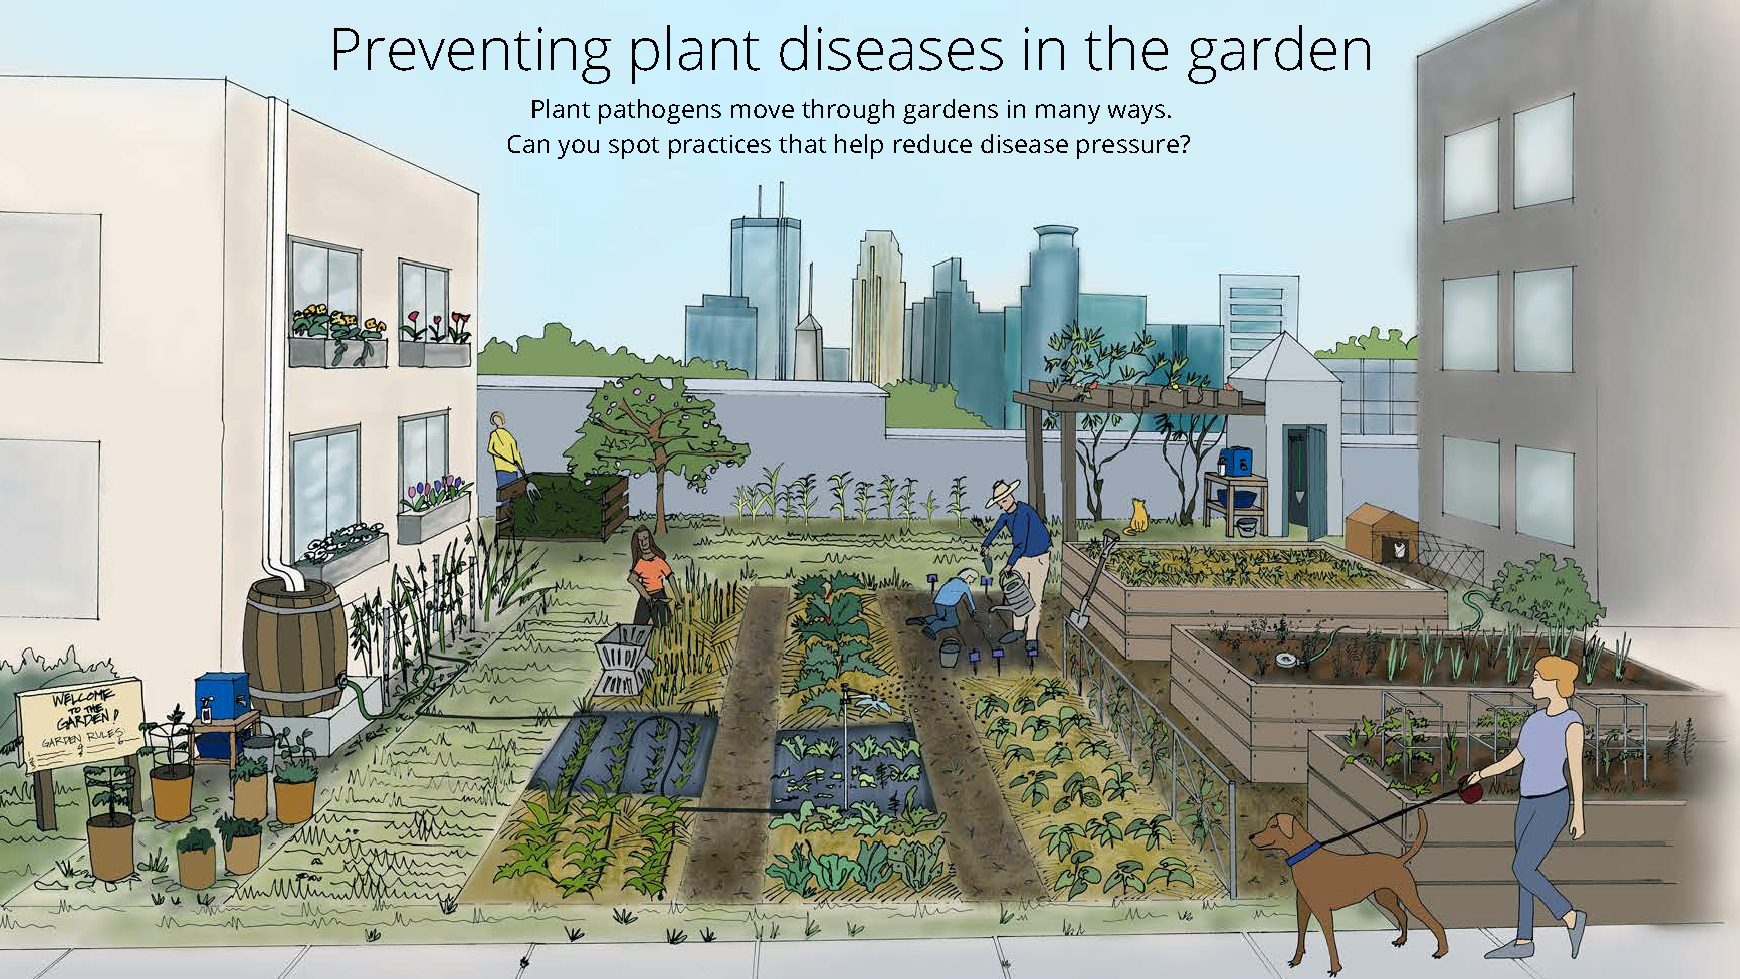 Illustration of people working in an urban garden with a cityscape in the background. Text on the image says "Preventing plant diseases in the garden. Plant pathogens move through gardens in many ways. Can you spot practices that help reduce disease pressure?"